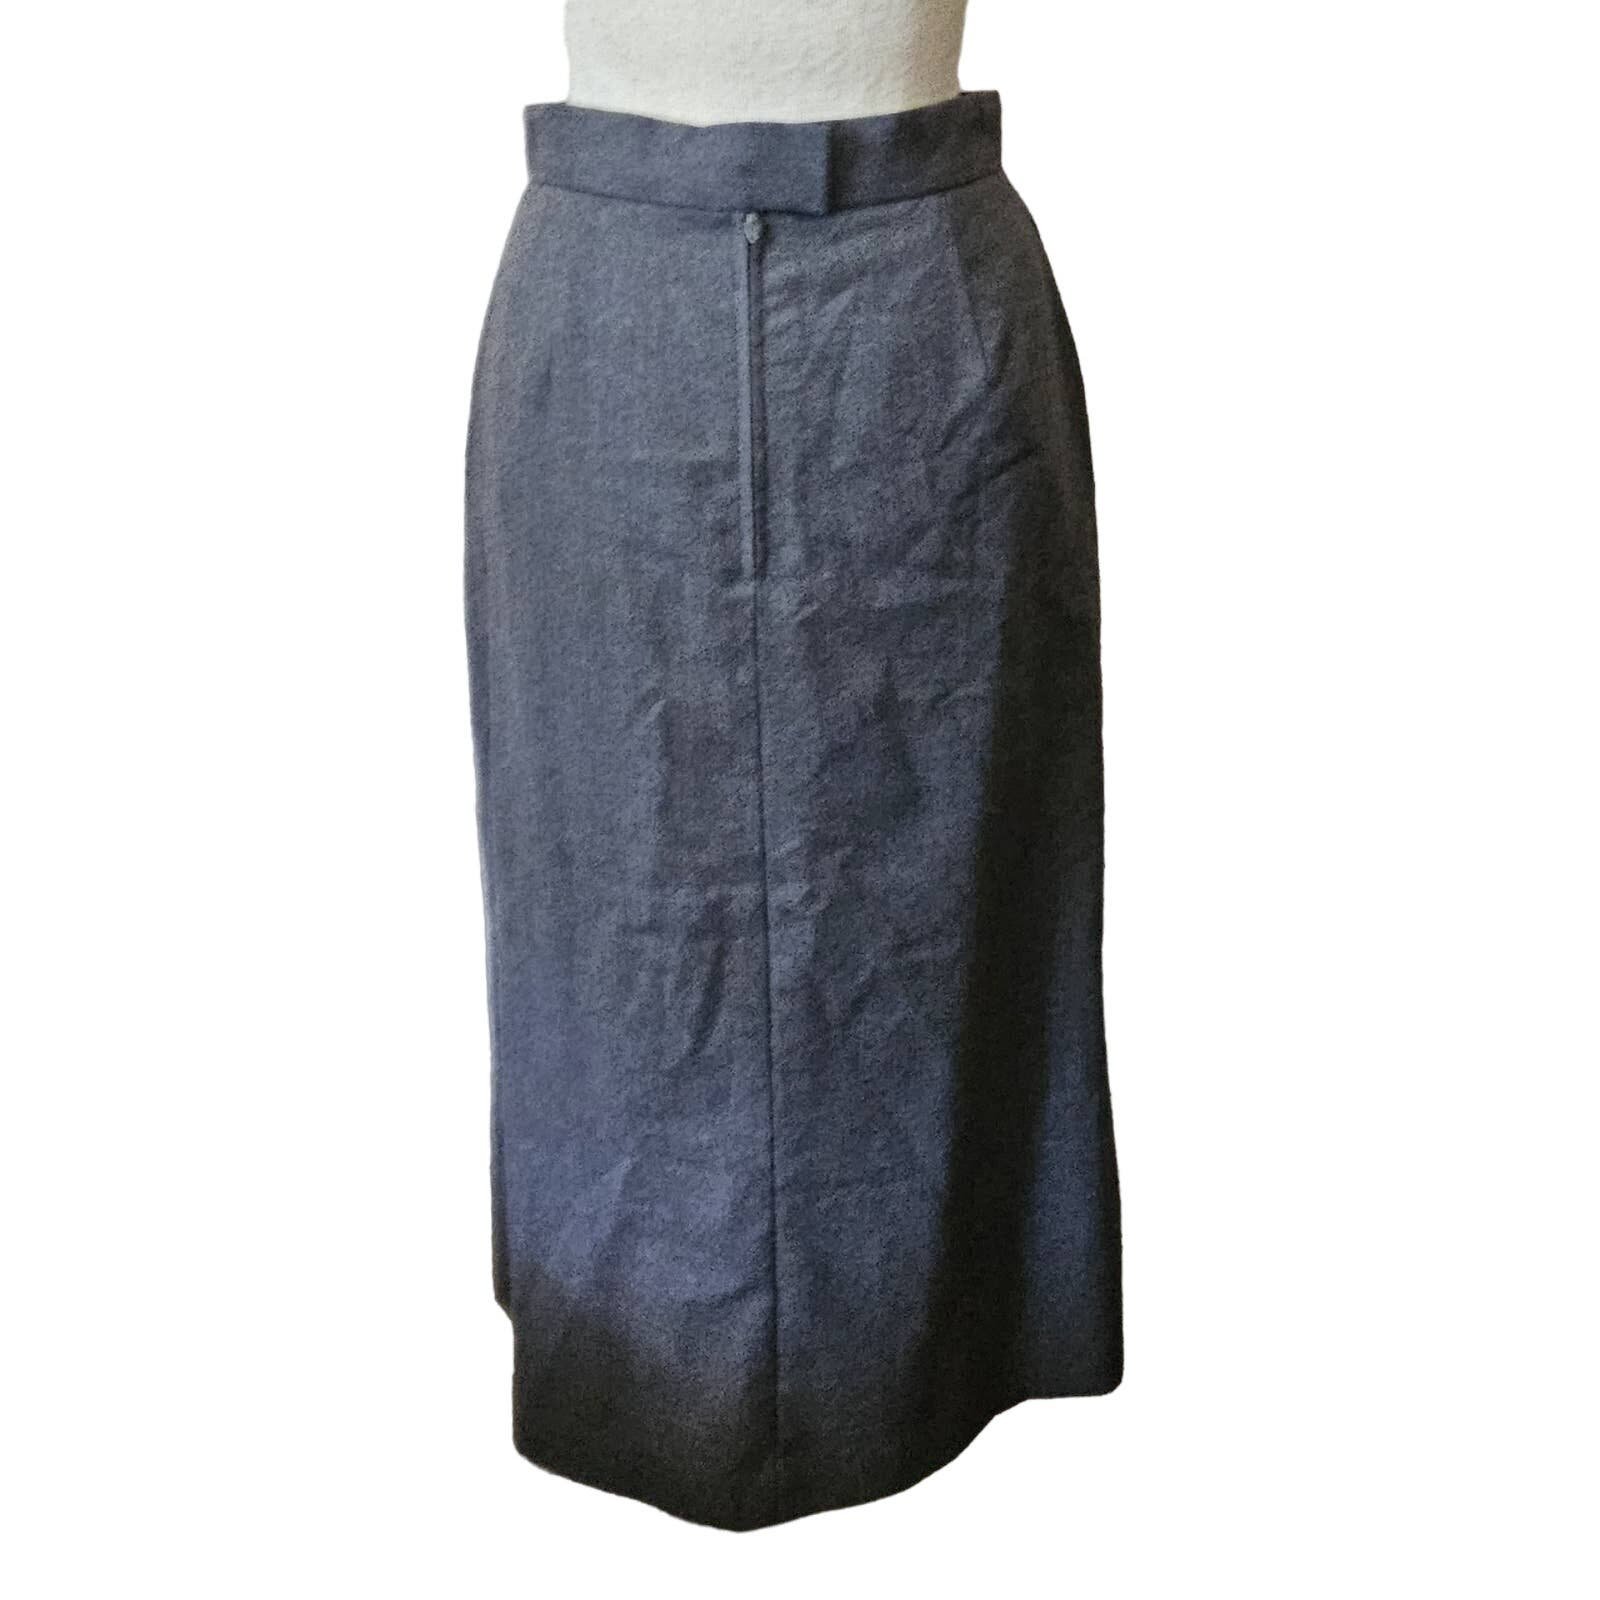 good price Vintage Grey Wool Midi Skirt With Pockets Size Small PN8iQQEXn just for you